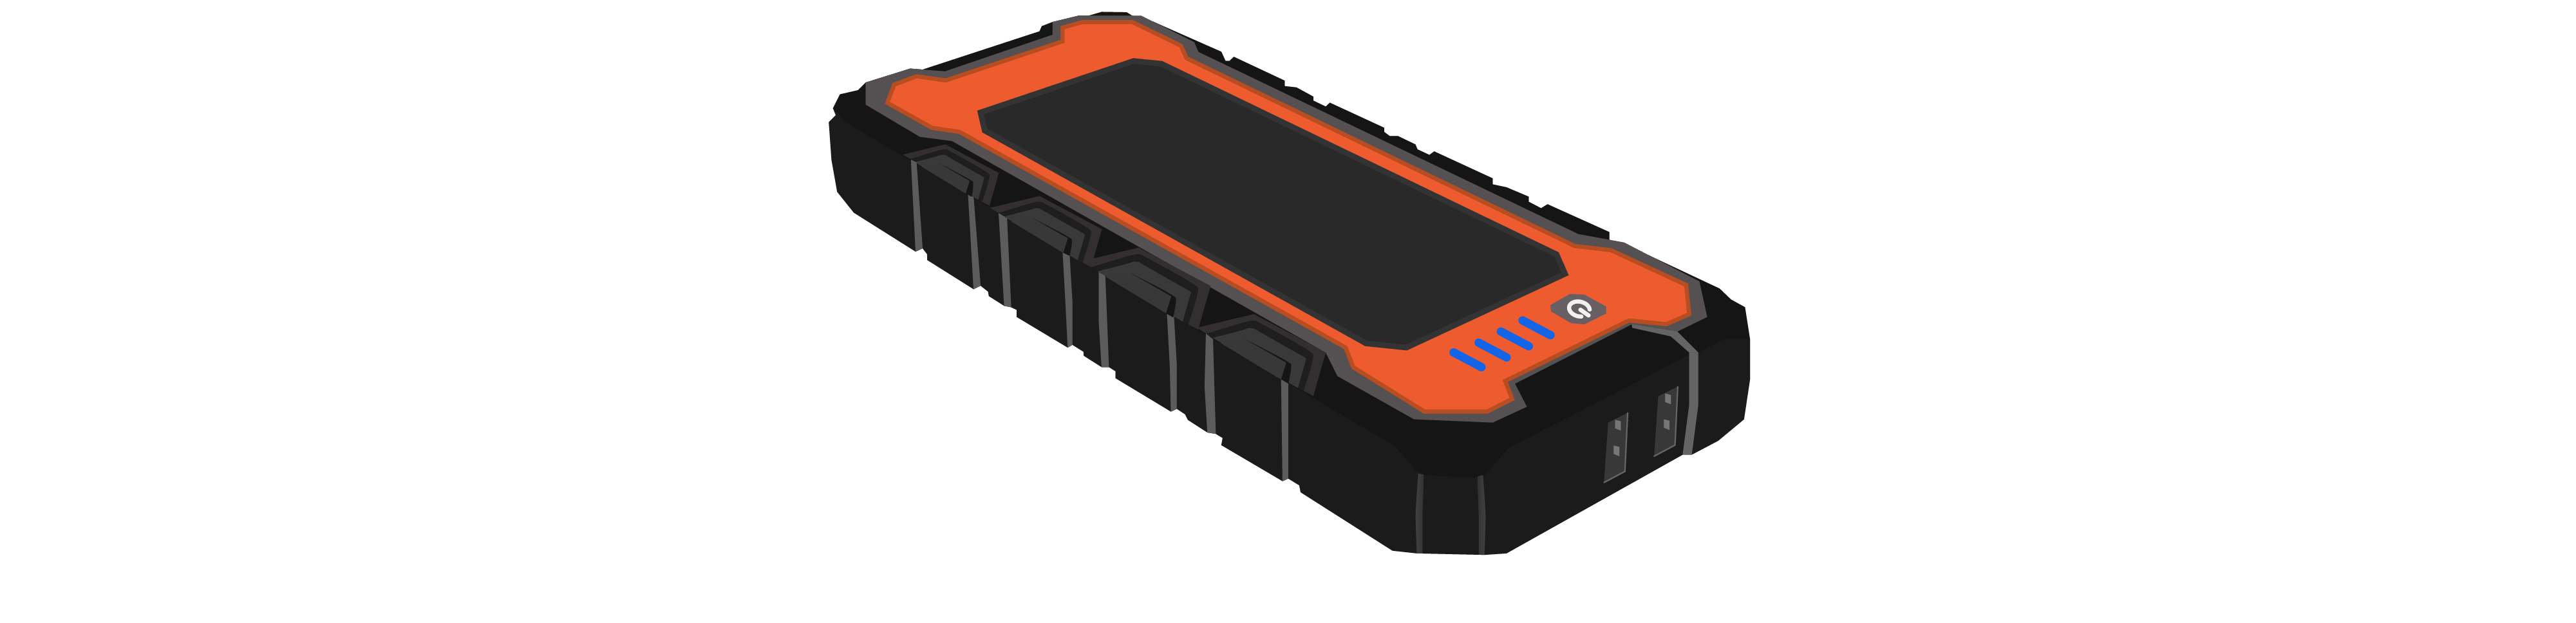 An orange and black power bank with a screen is shown at an angled view. The black casing gives the appearance of ruggedness.